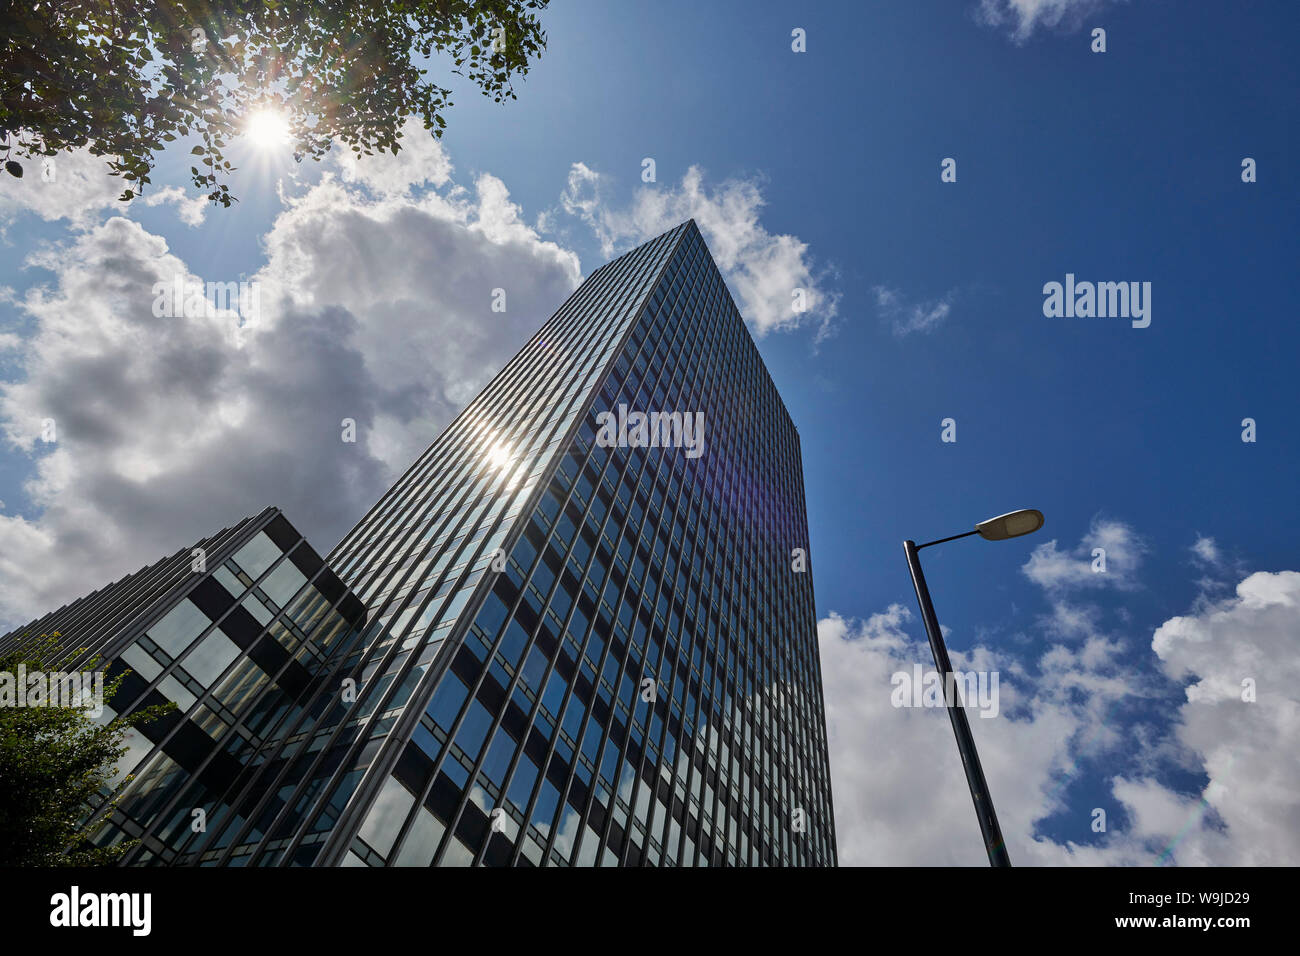 Co op CIS Tower, Manchester, North West England, UK Stock Photo